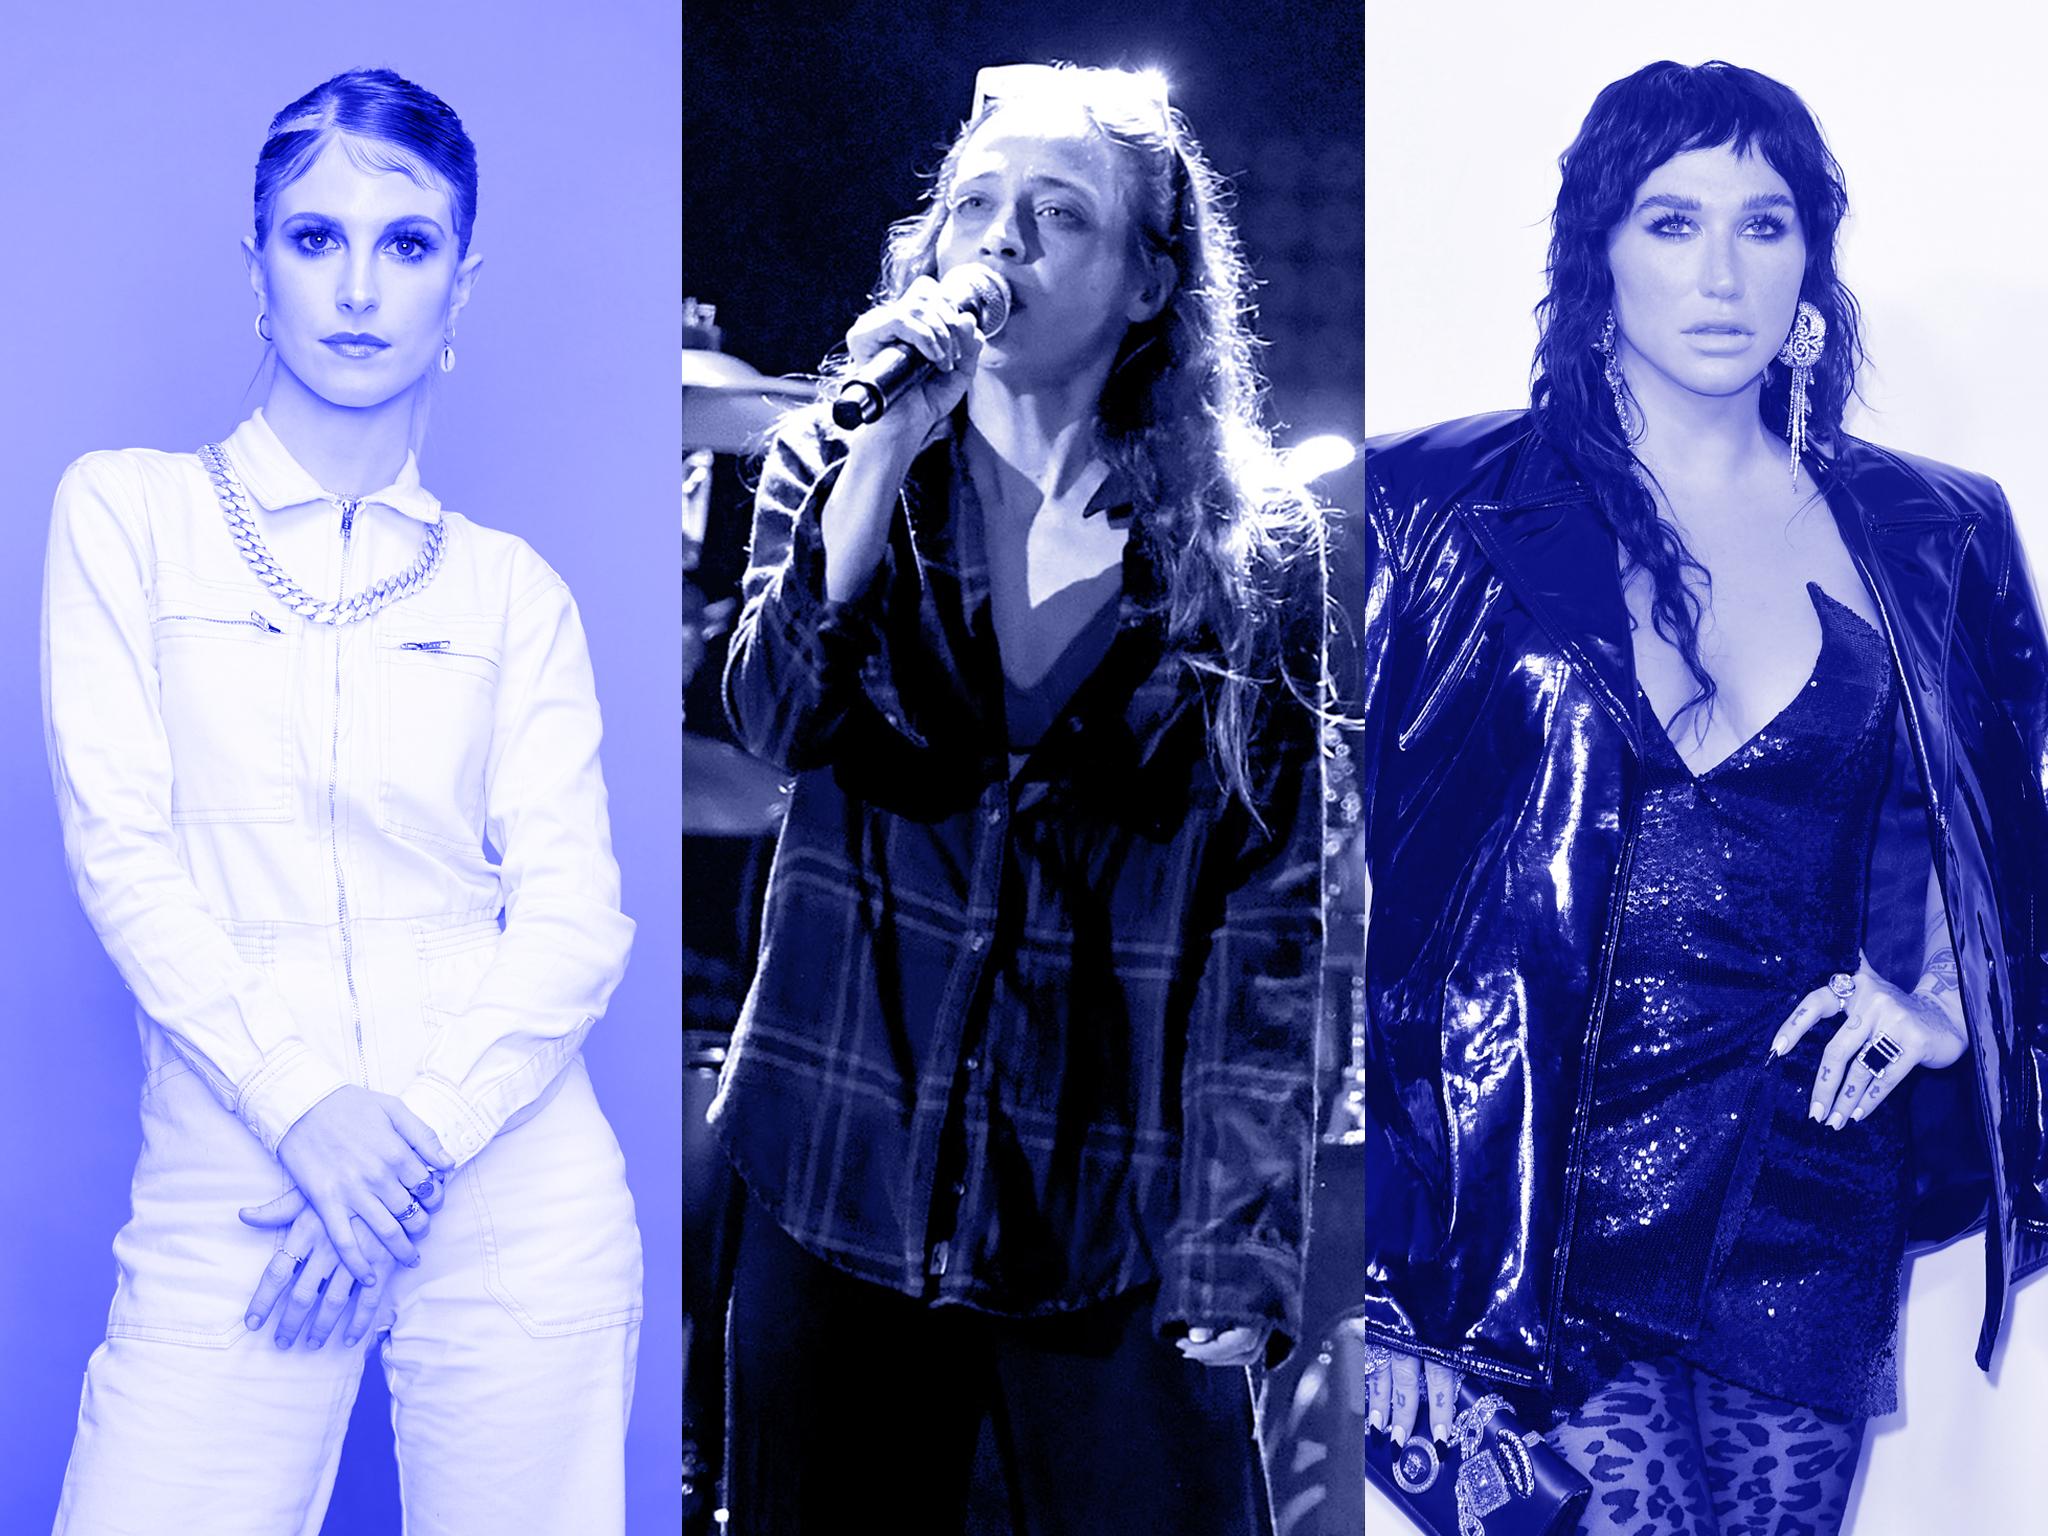 Hayley Williams, Fiona Apple and Kesha have all released albums existing in a lineage of records by women reckoning with their pain